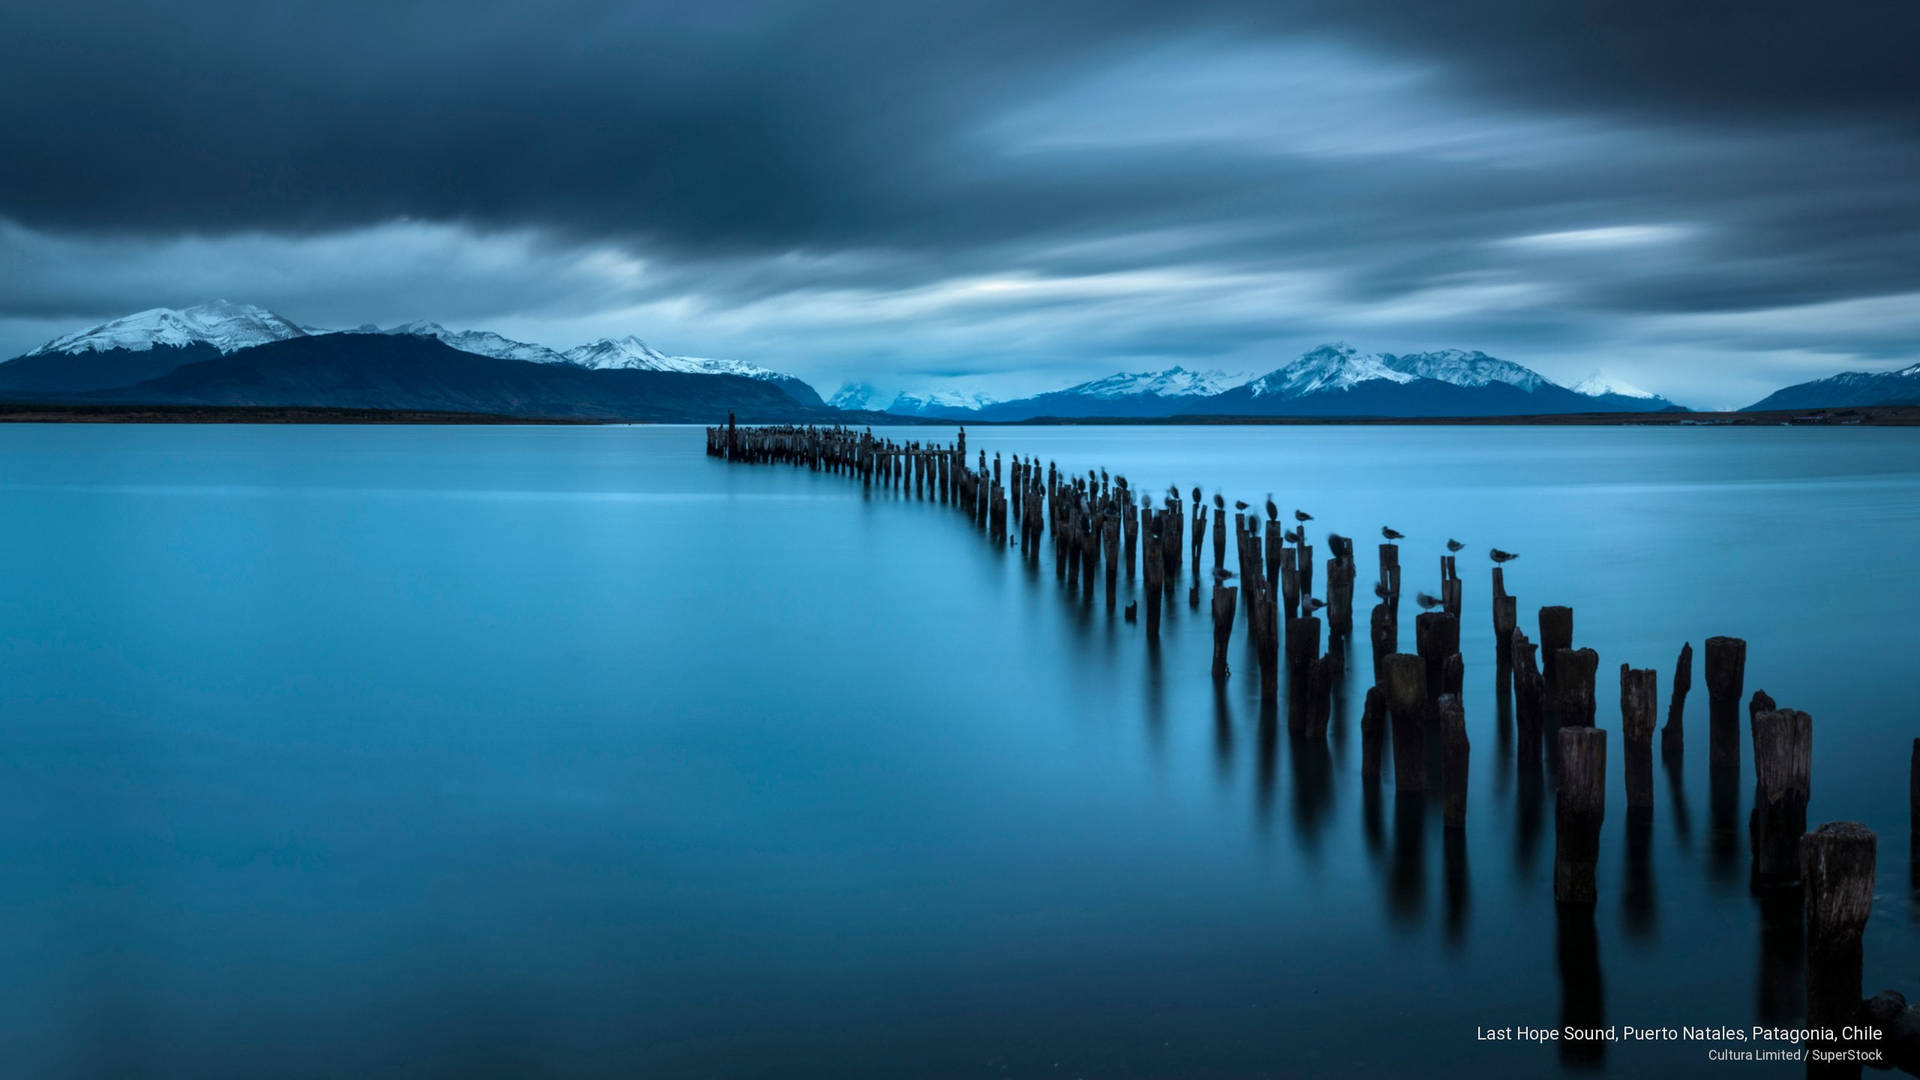 Puerto Natales In Chile (puerto Natales In Chile) Is Not A Complete Sentence And Does Not Make Sense In The Context Of Computer Or Mobile Wallpaper. Can You Provide More Context Or A Complete Sentence To Translate? Wallpaper